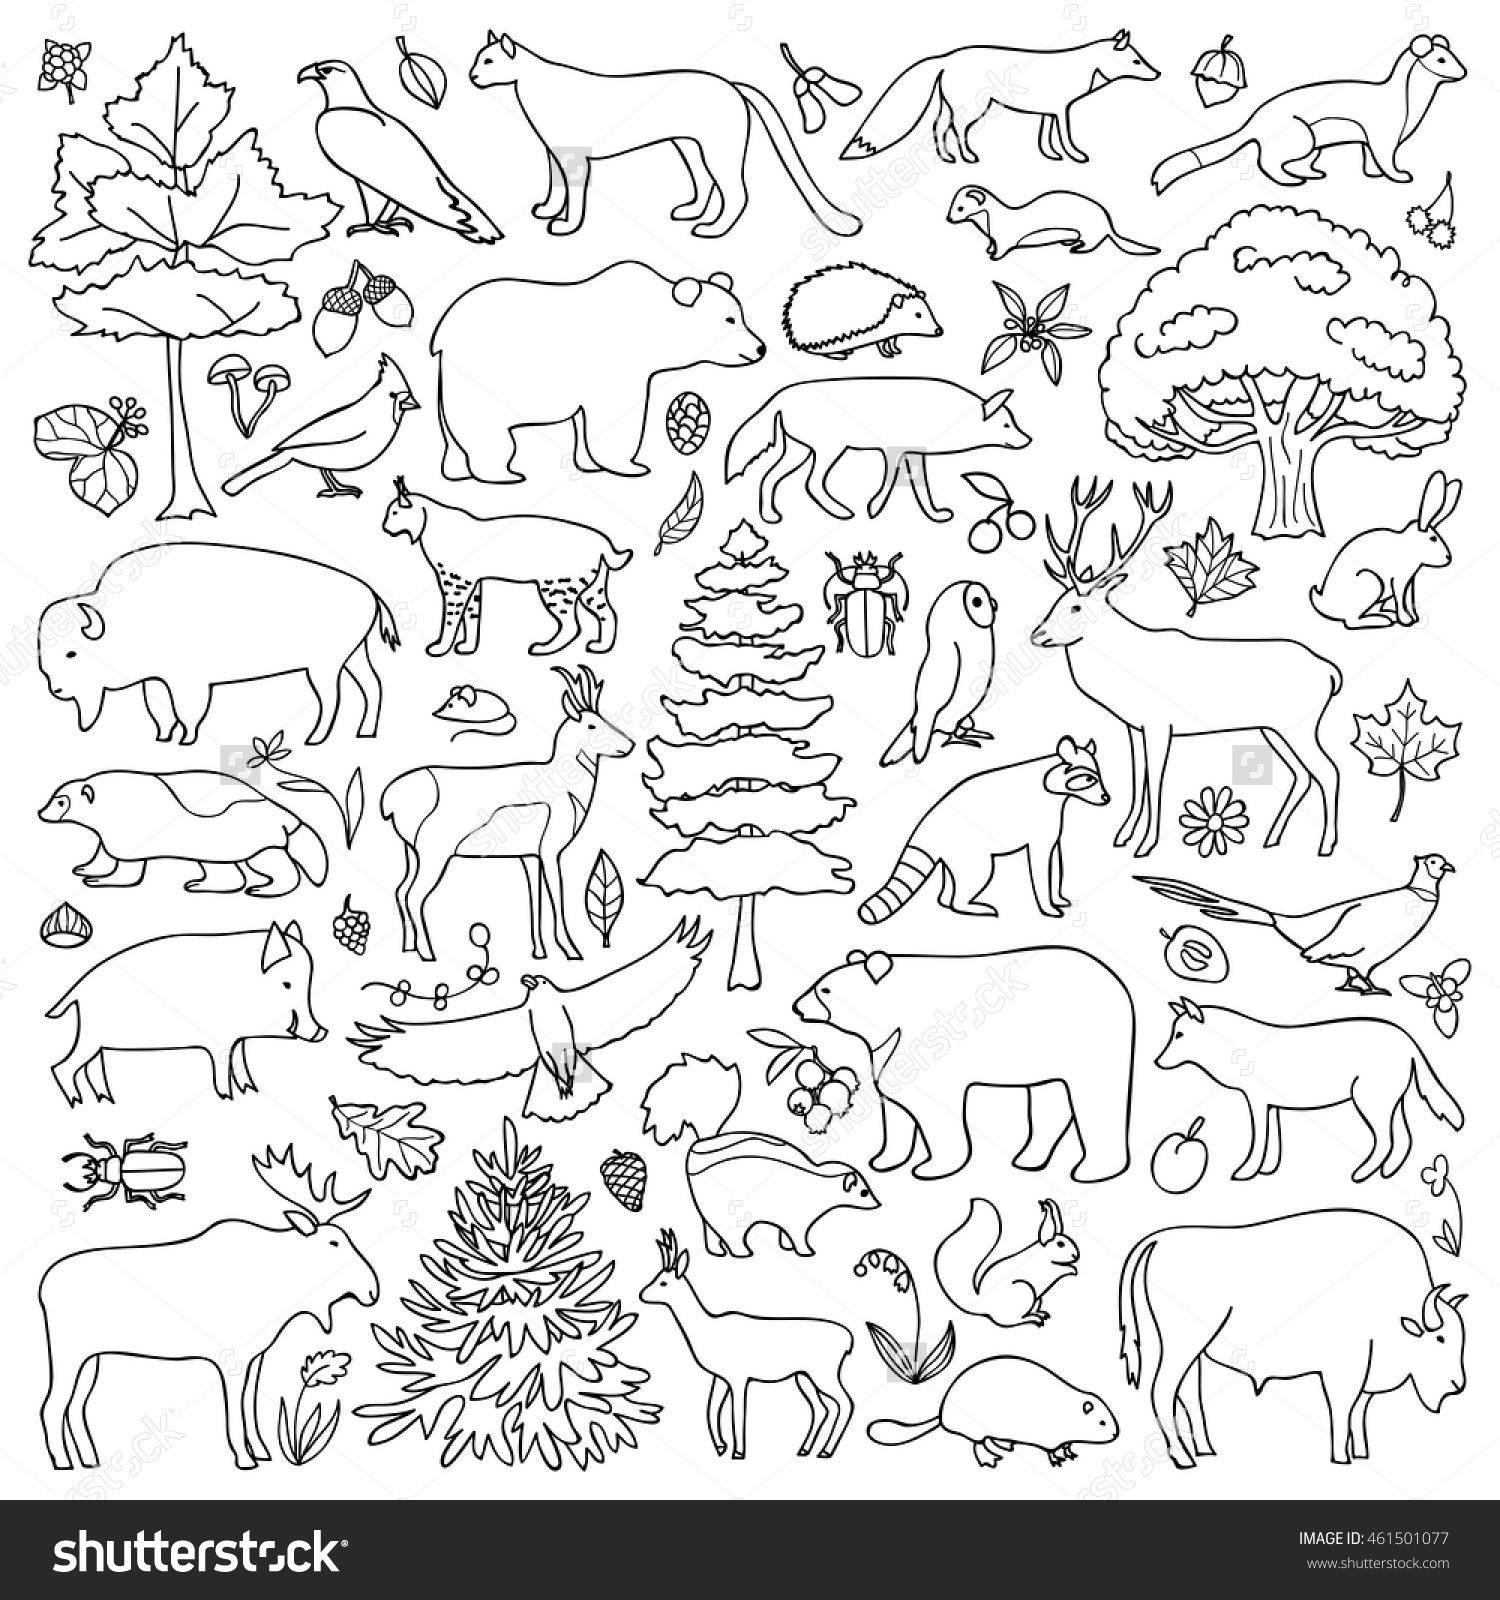 Wanted Forest Animal Coloring Pages Printable Inspiring For Preschoolers Styles